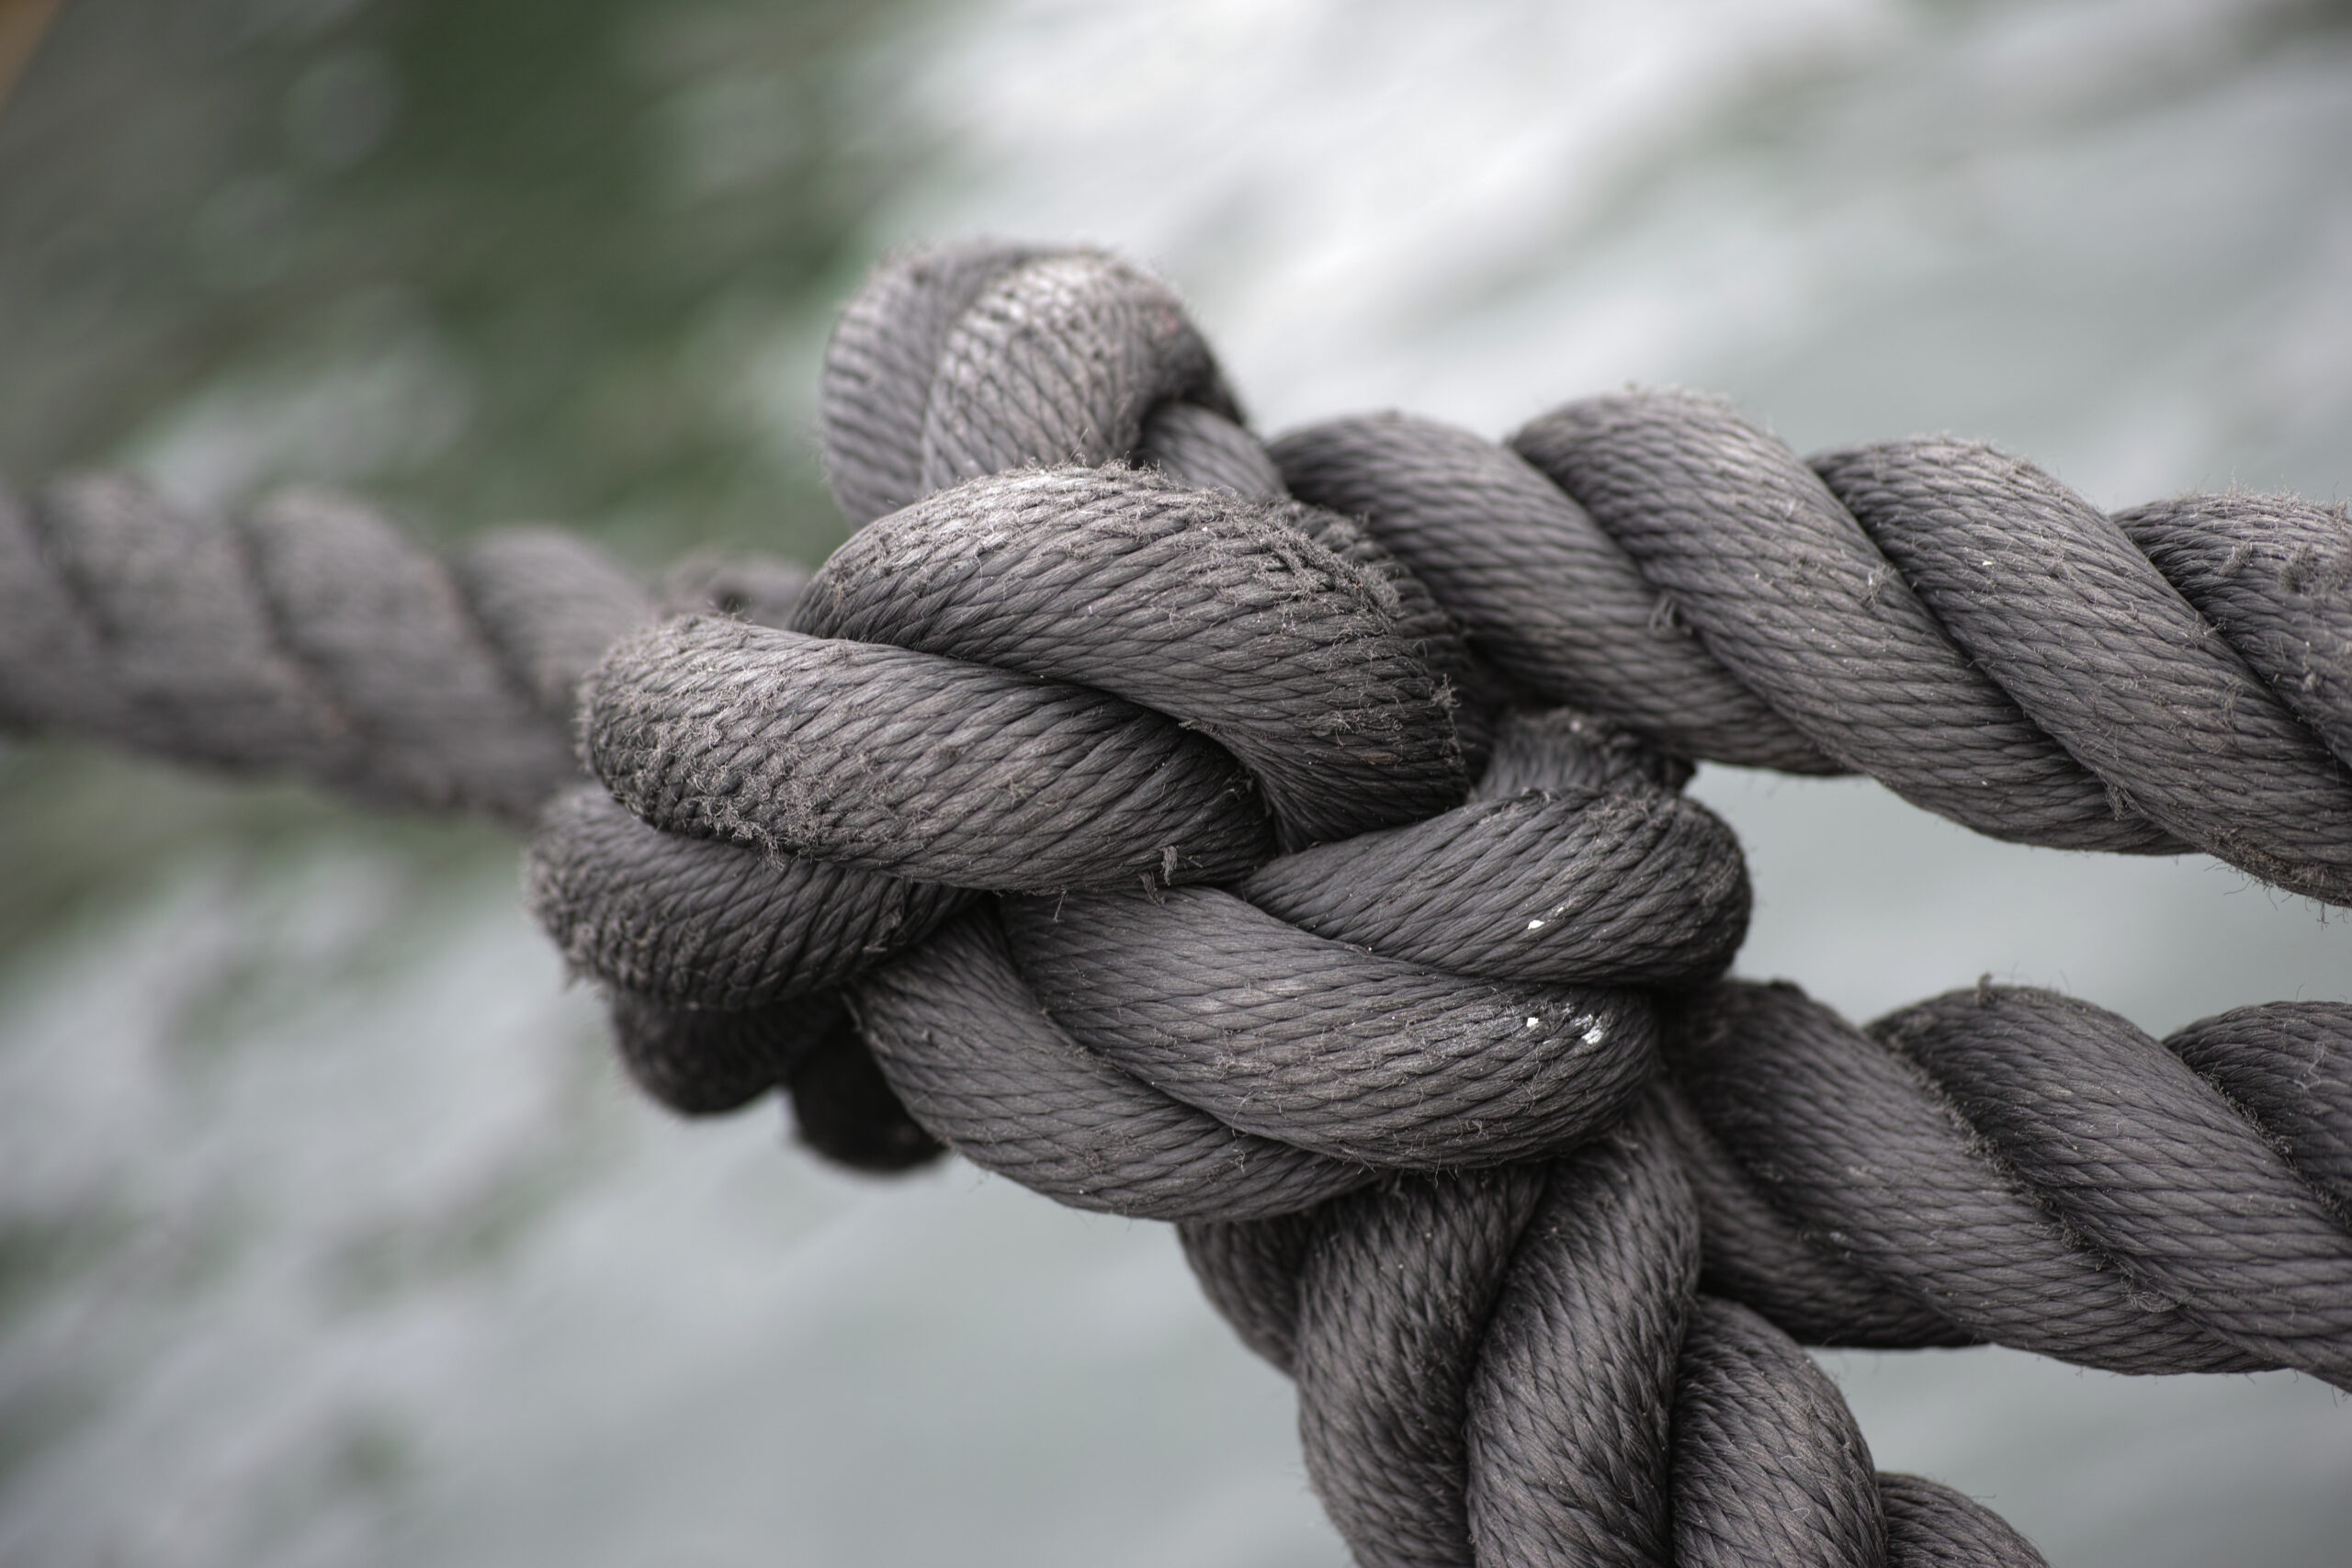 A close-up photo of a completed backup knot, highlighting the importance of this safety measure while rappelling and showcasing the two figure-eight knots and carabiner